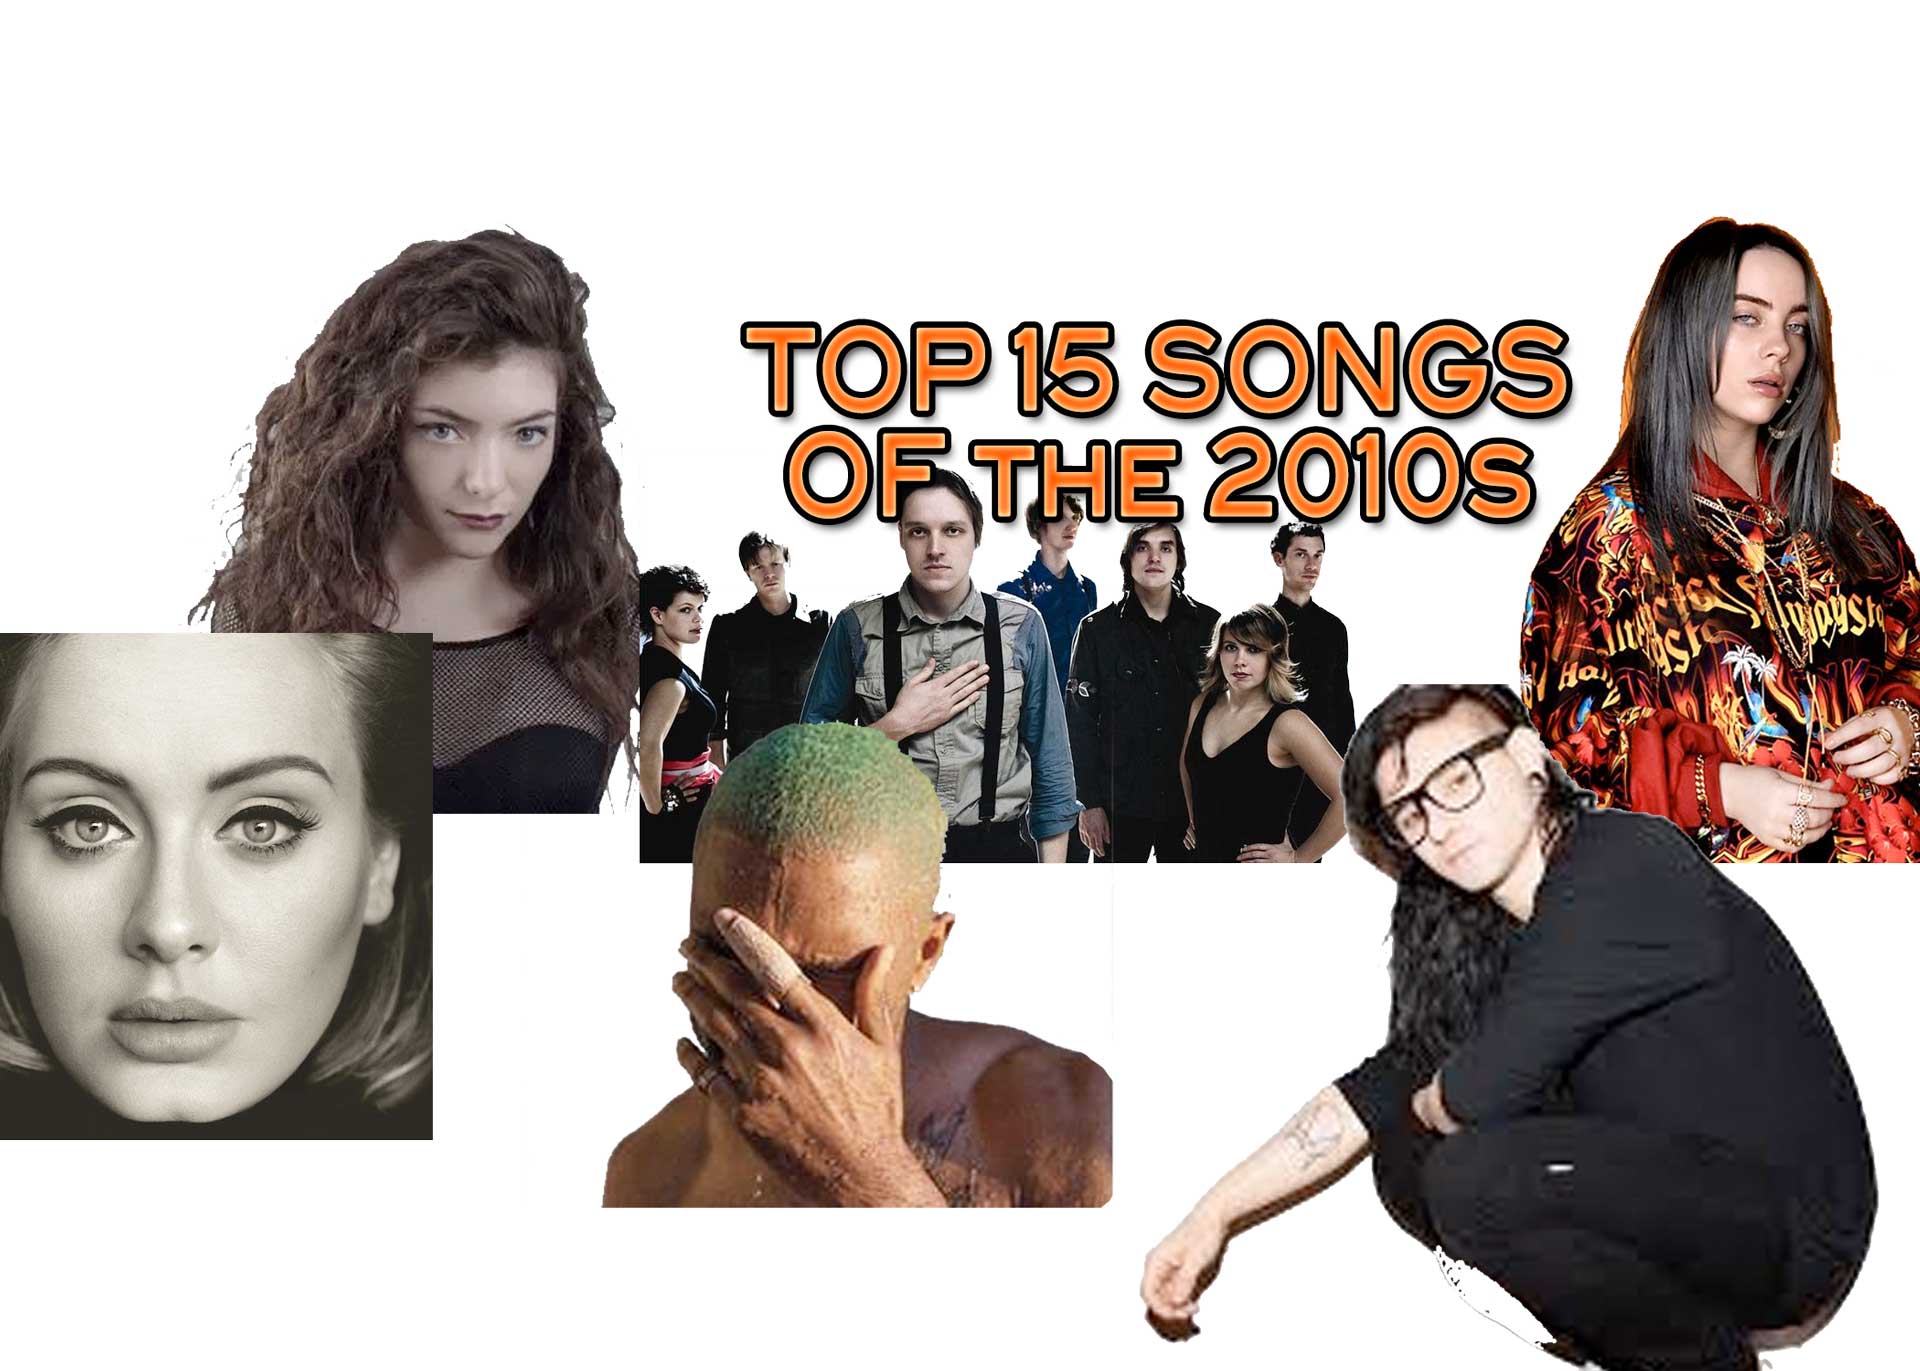 Top 15 Songs of 2010s - B-Sides